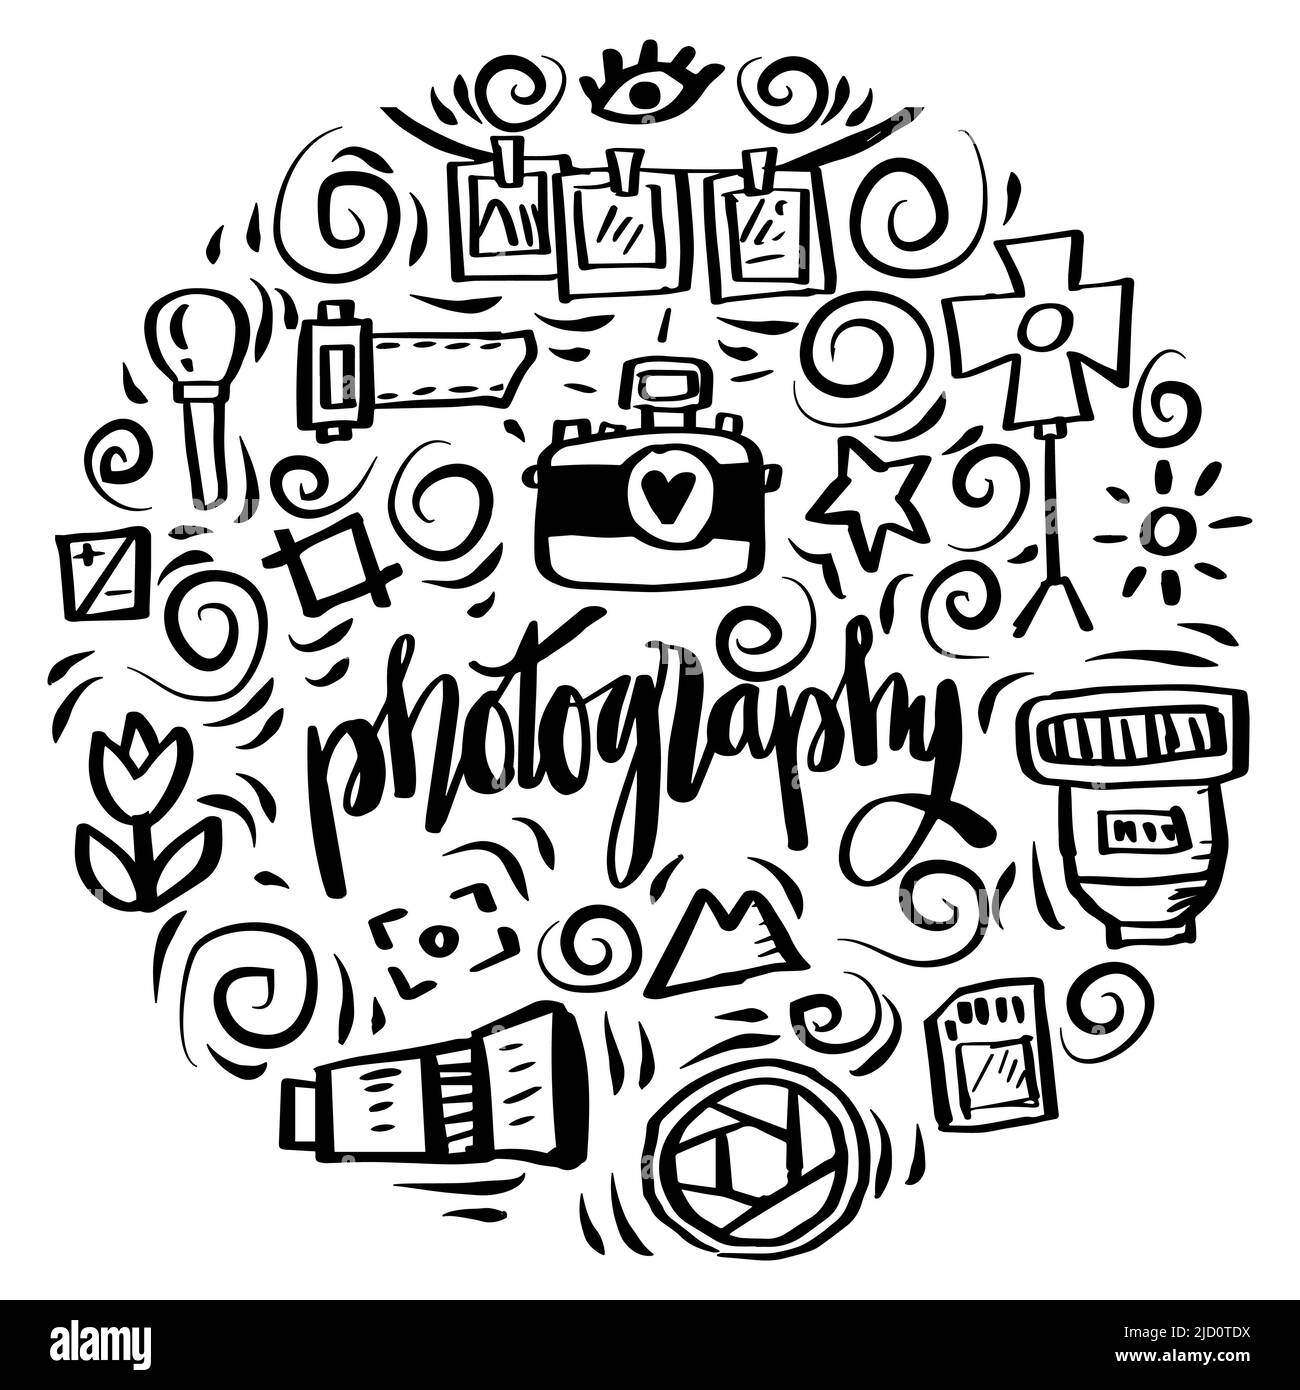 Hand drawn doodle photography Stock Photo